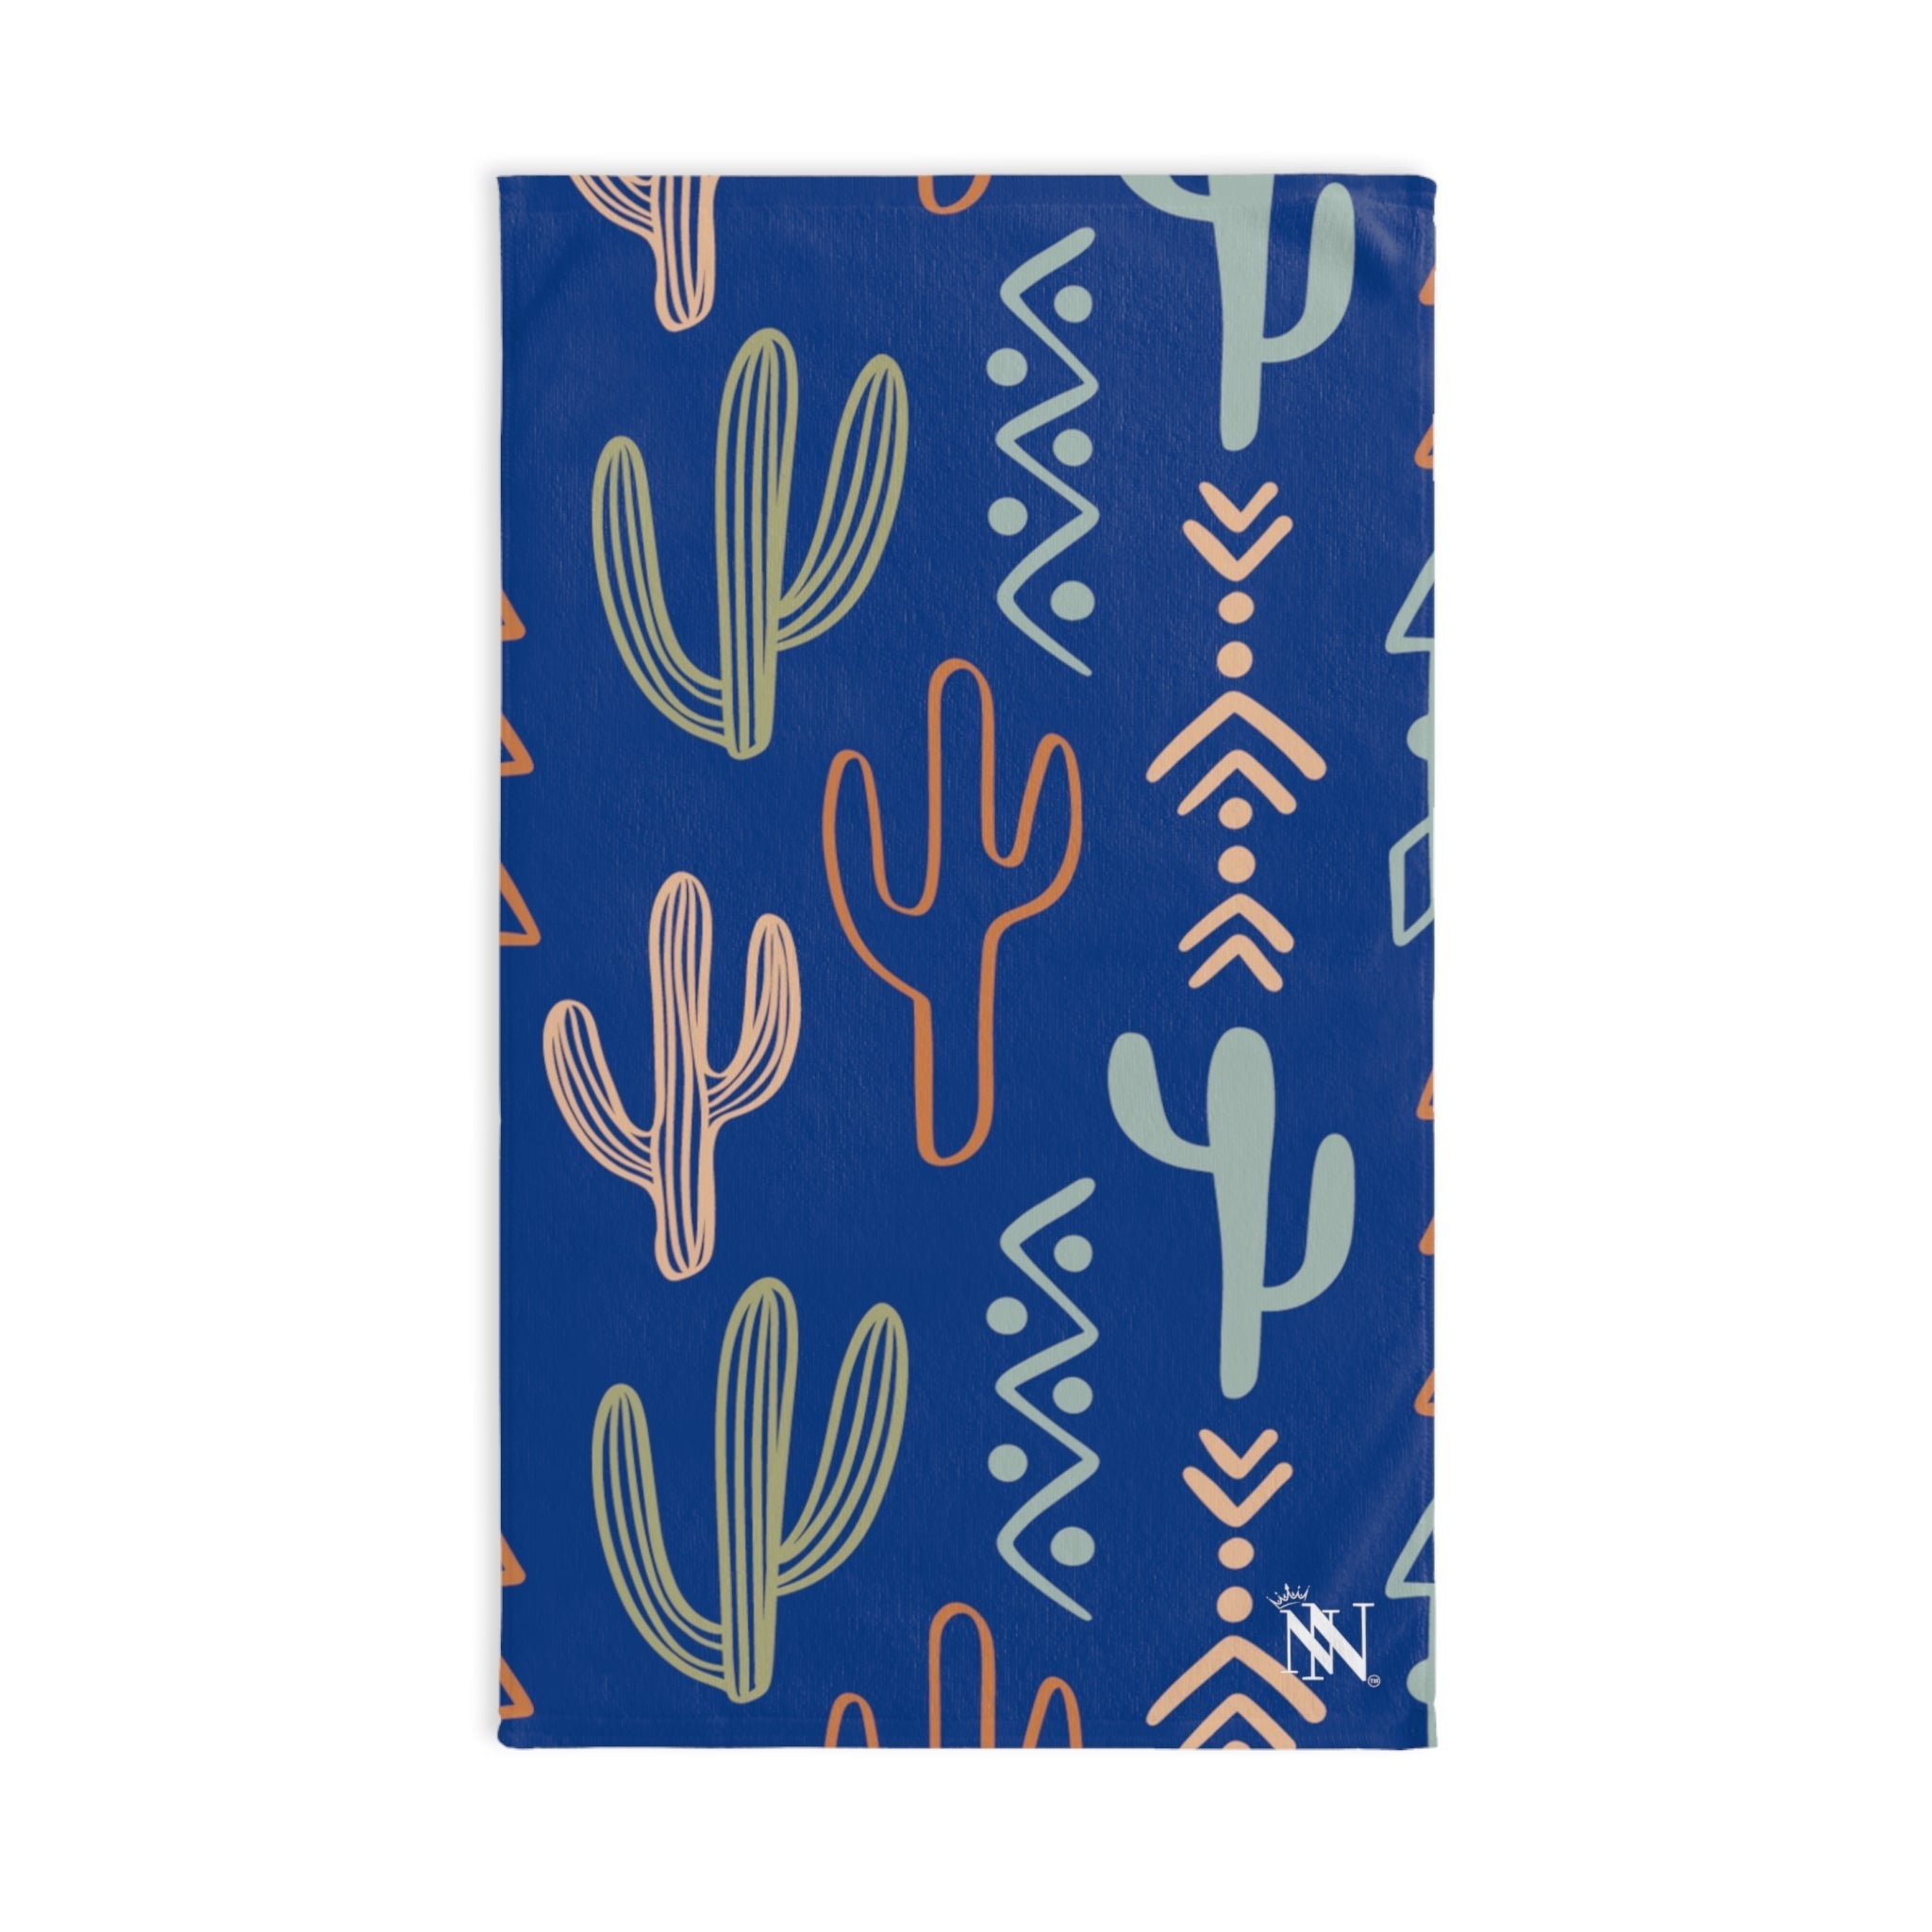 Cactus Western Blue | Gifts for Boyfriend, Funny Towel Romantic Gift for Wedding Couple Fiance First Year Anniversary Valentines, Party Gag Gifts, Joke Humor Cloth for Husband Men BF NECTAR NAPKINS